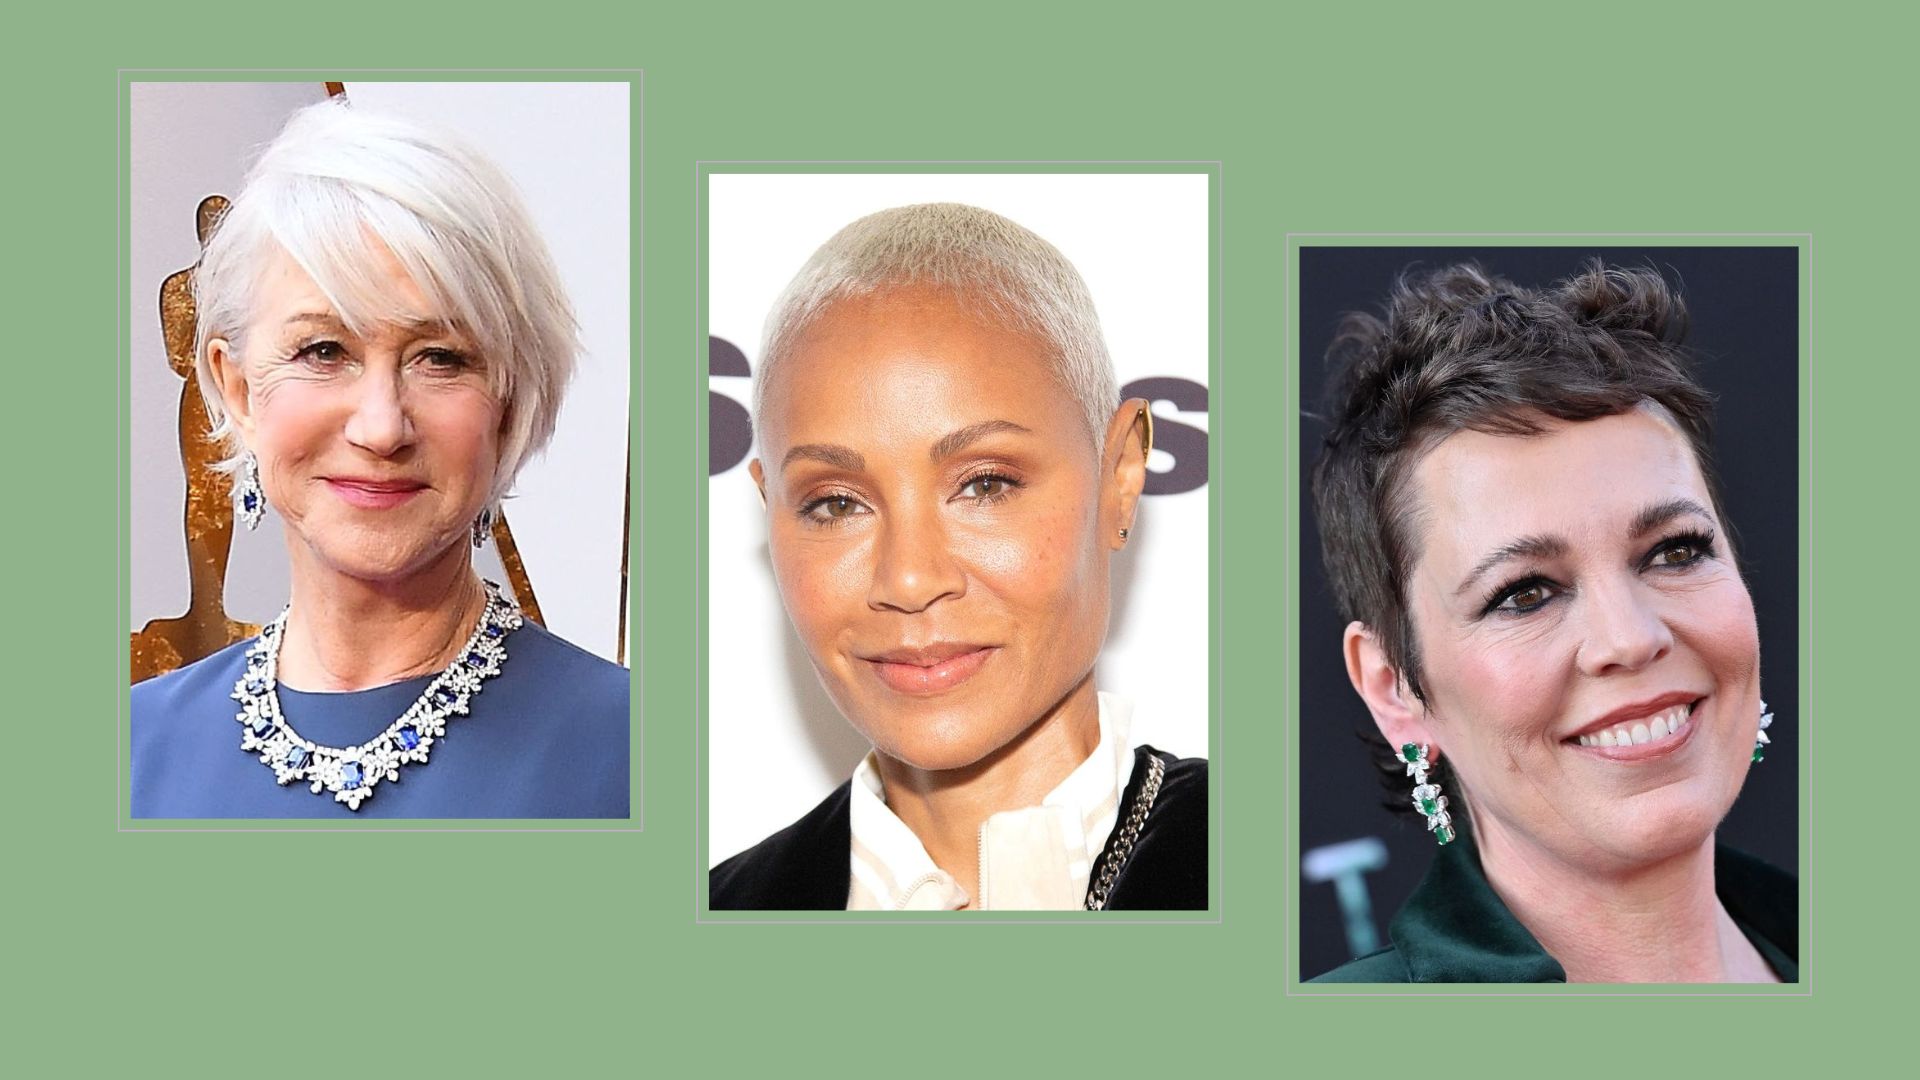 65 short hairstyles for women over 50 to inspire a fresh cut